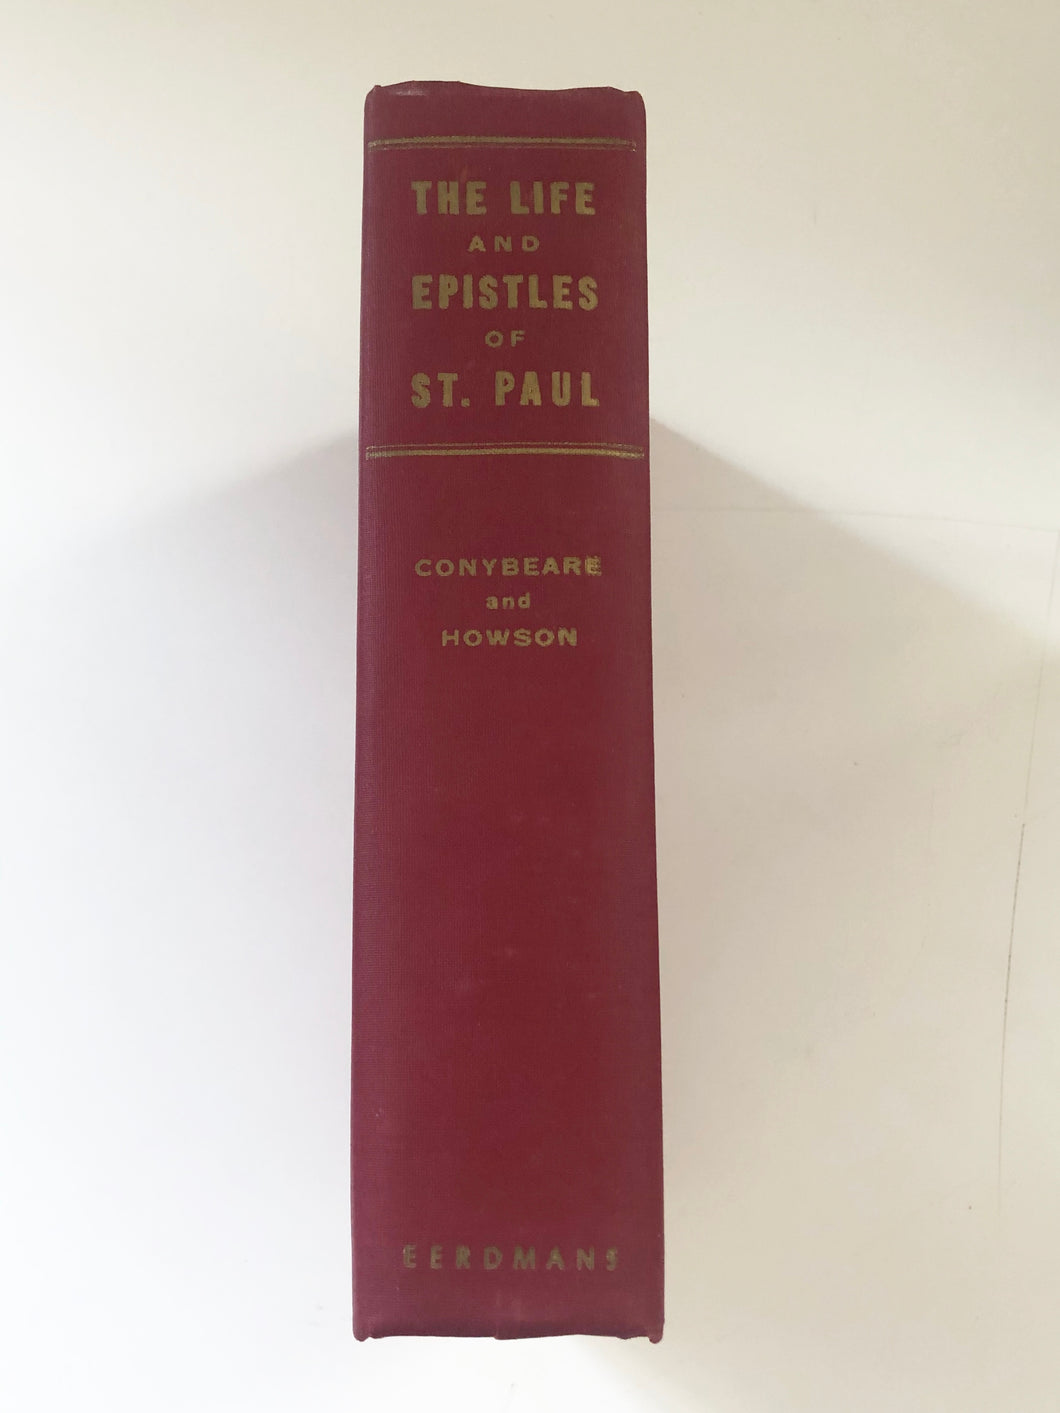 The Life and Epistles of St. Paul by W.J. Conybeare and J.S. Howson